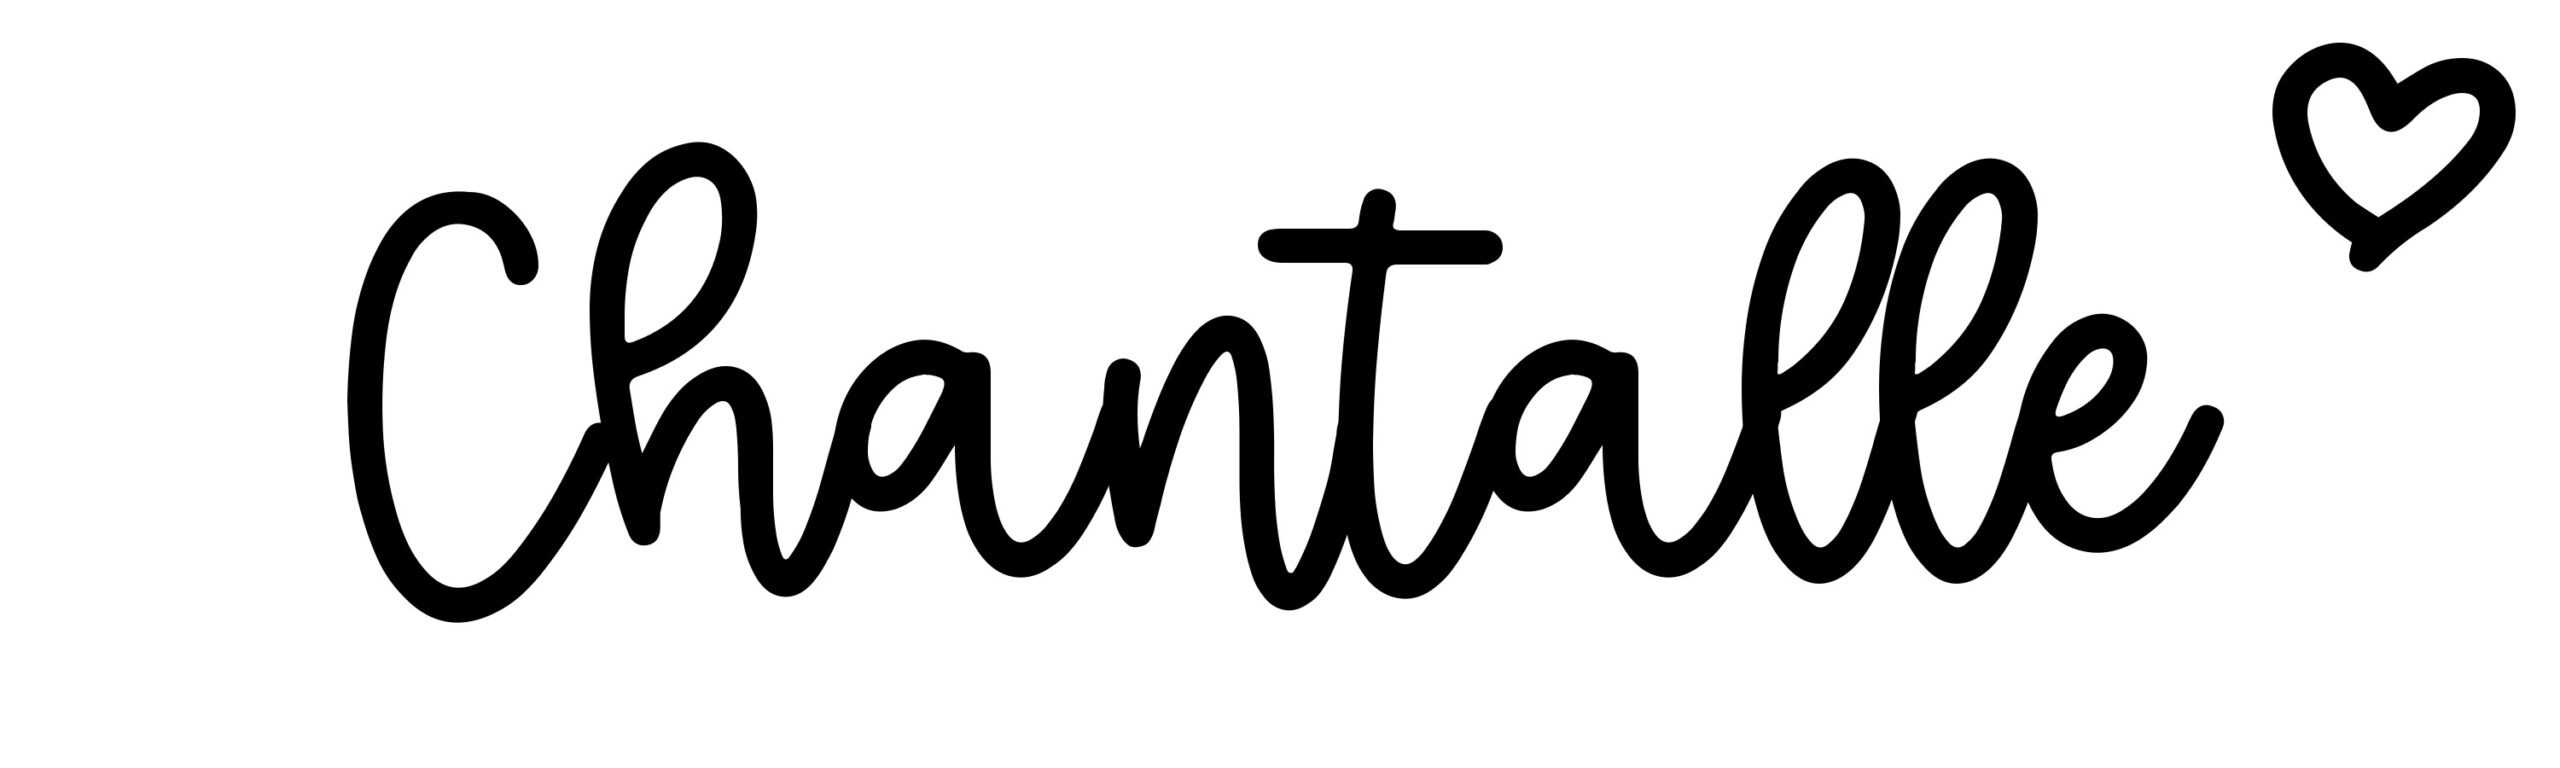 Chantalle - Name meaning, origin, variations and more